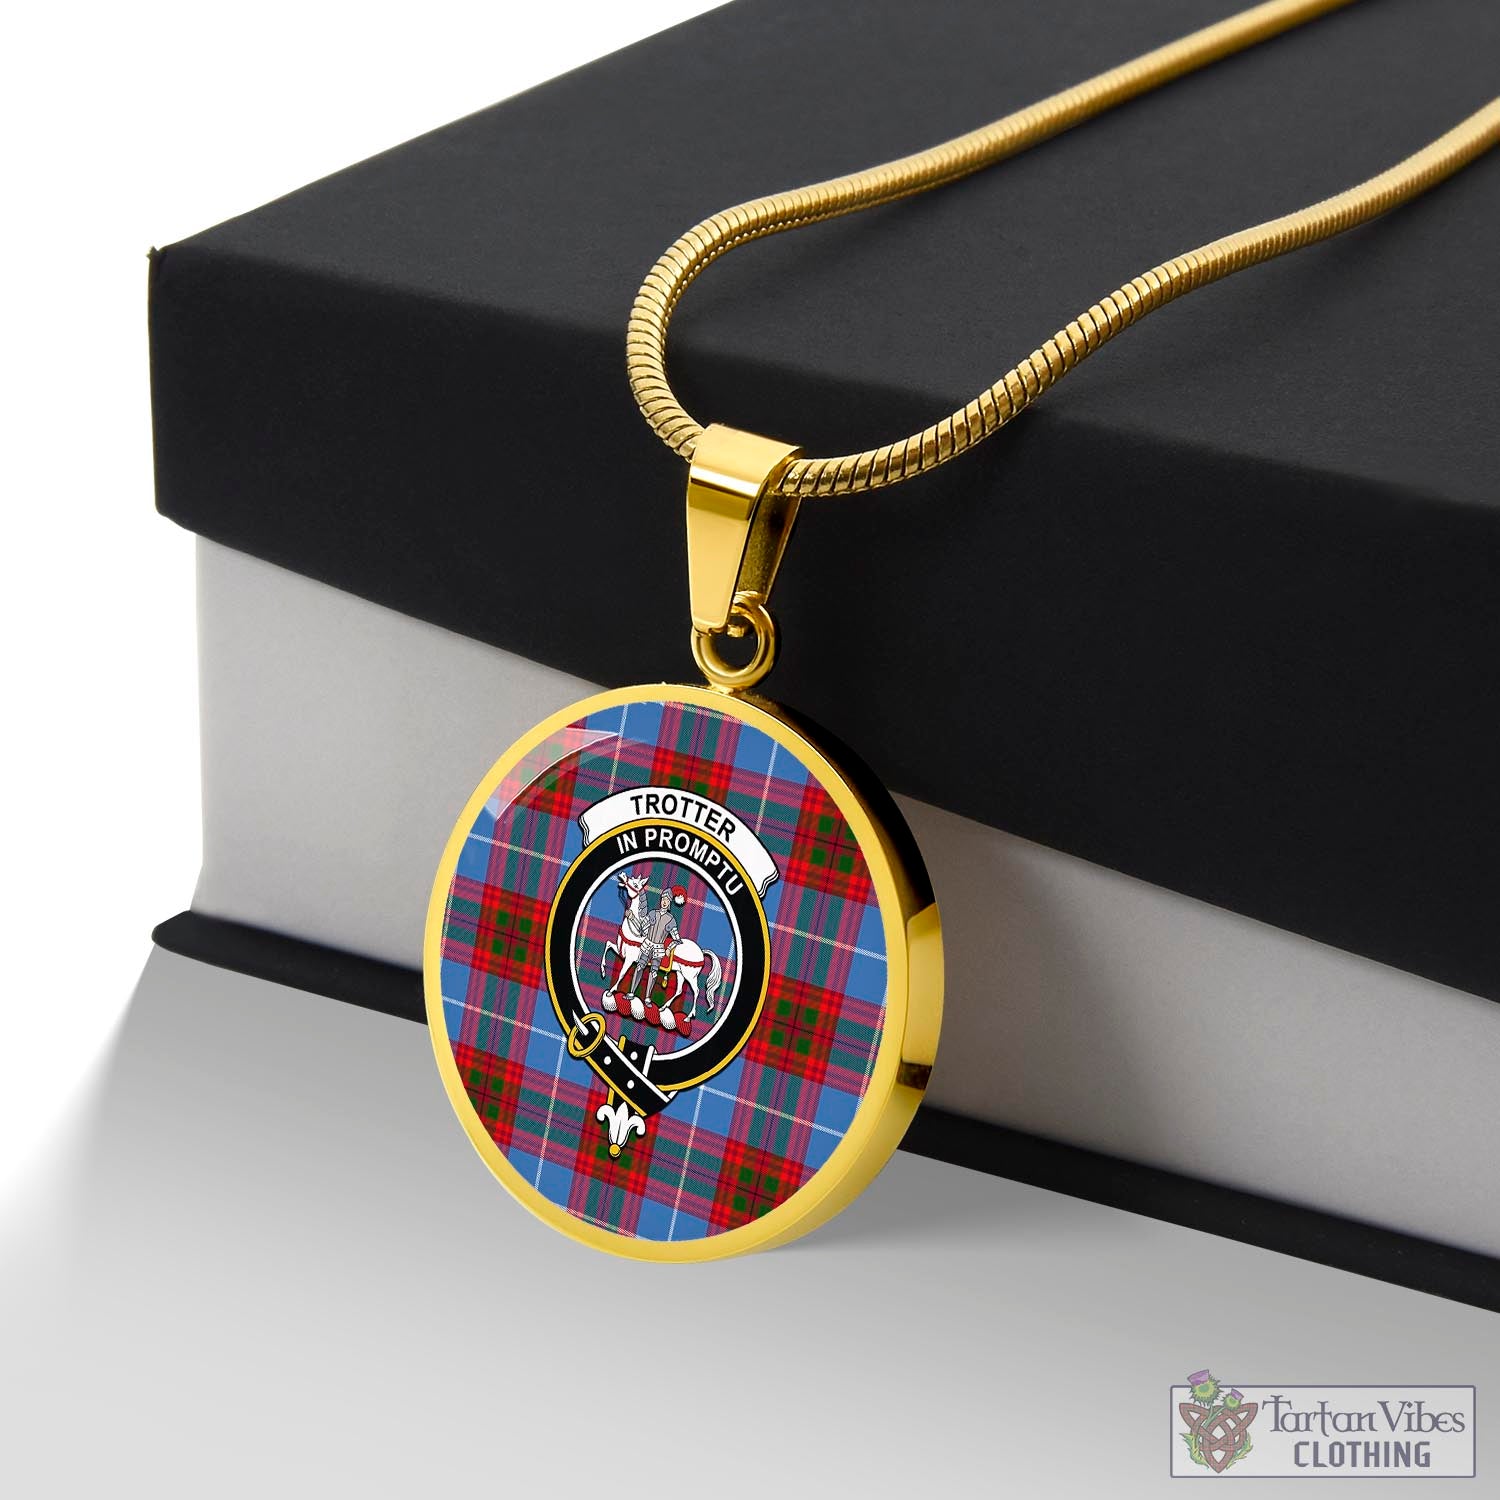 Tartan Vibes Clothing Trotter Tartan Circle Necklace with Family Crest